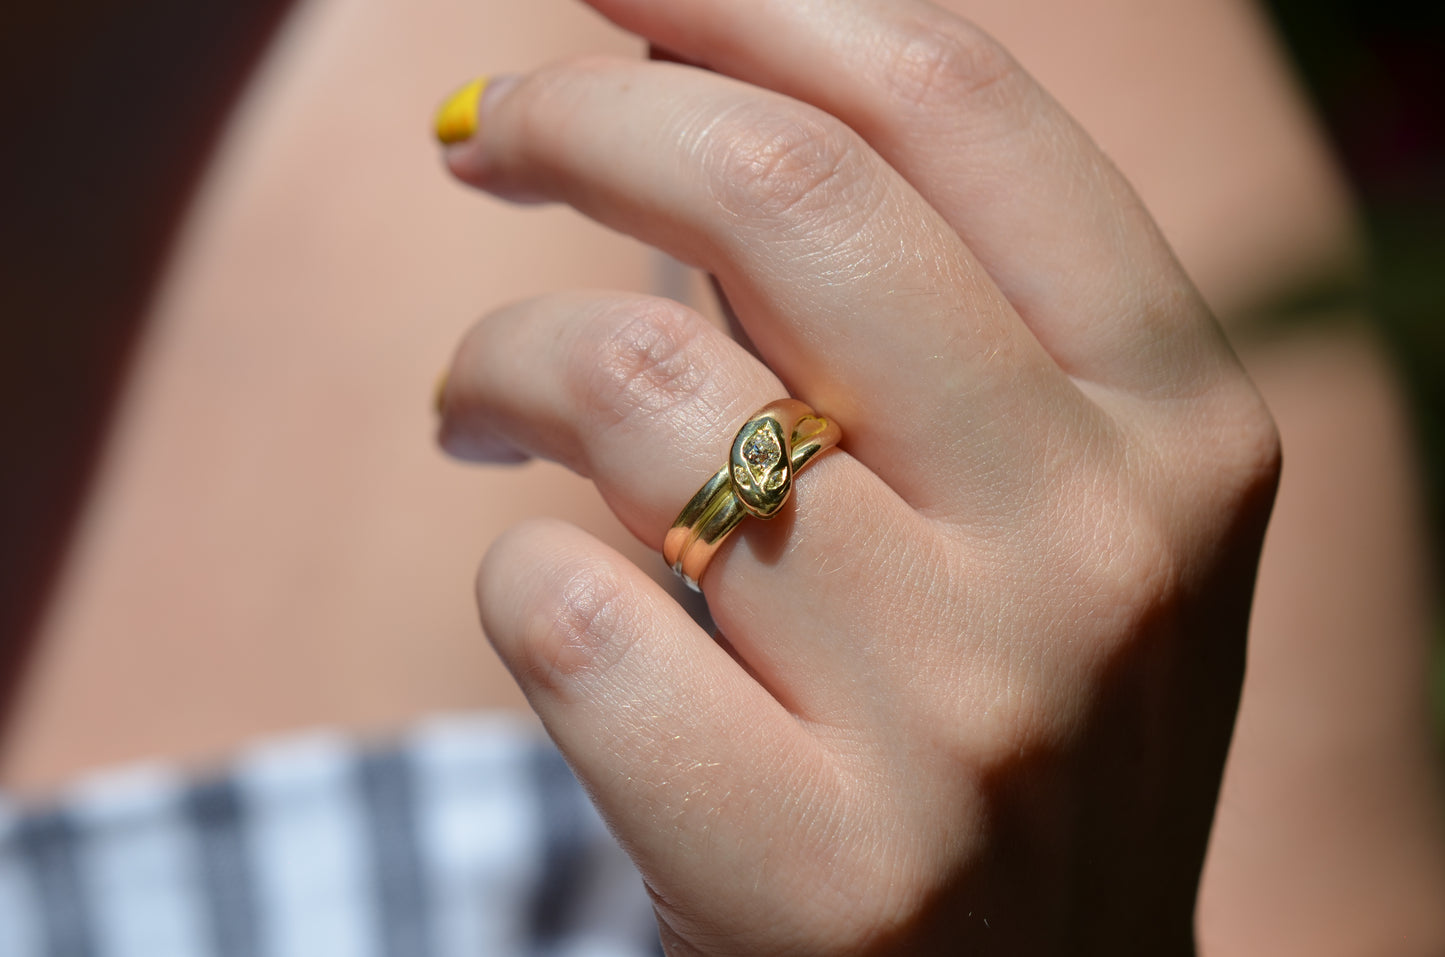 Medium-close view of Victorian yellow gold snake ring with diamond head and eyes shown on the left ring finger of a Caucasian model to demonstrate scale while worn.